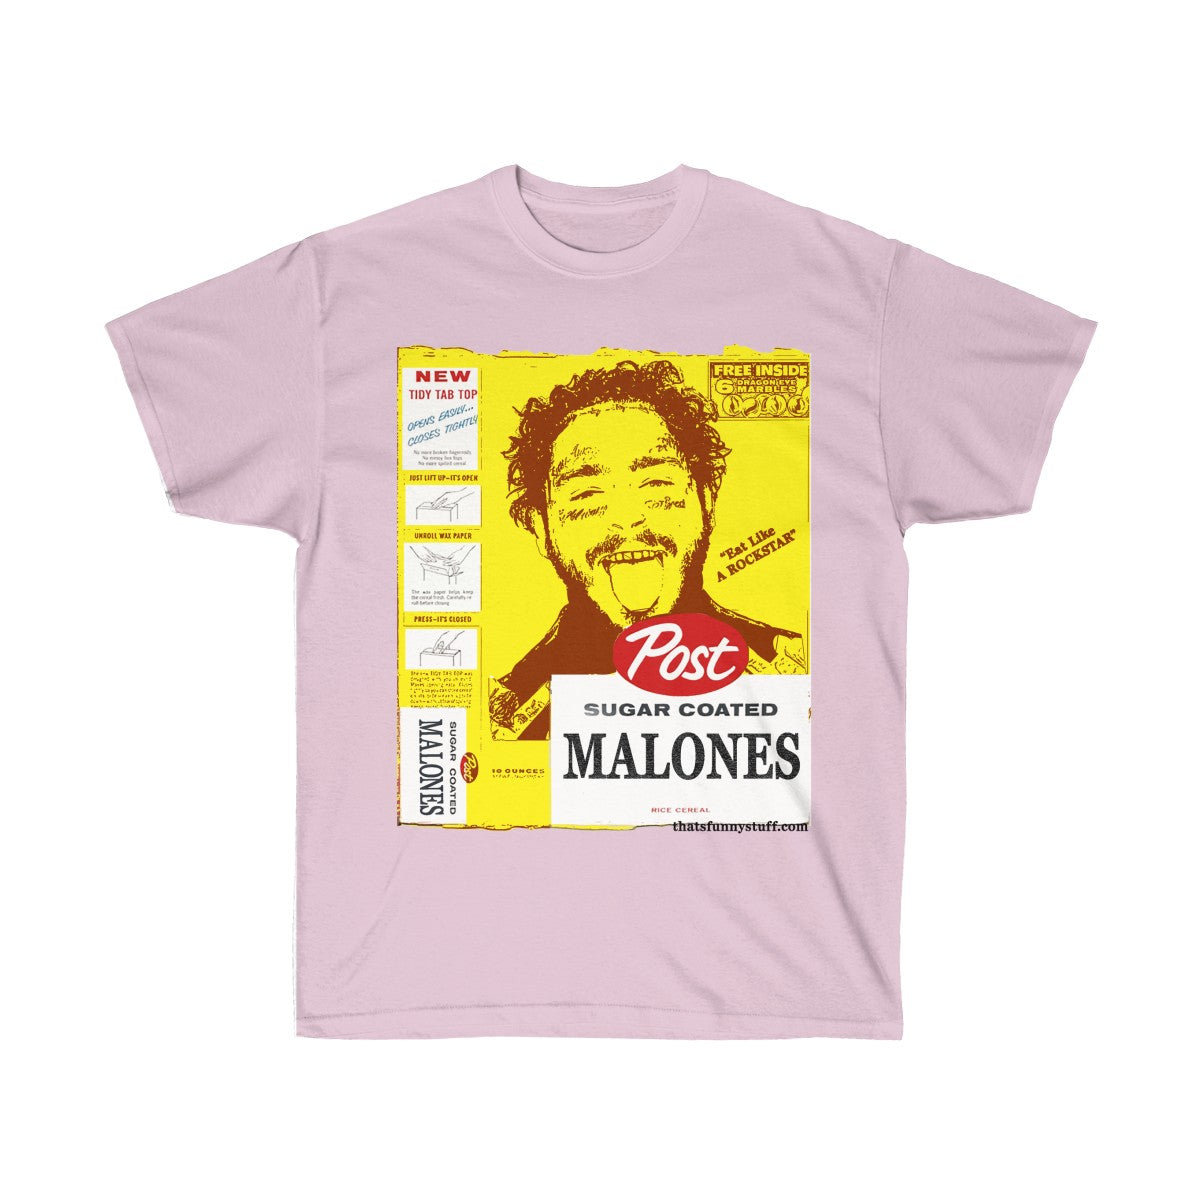 Post Malone's Post Malones Cereal "Eat like a ROCKSTAR" Funny Cereal Box Tee